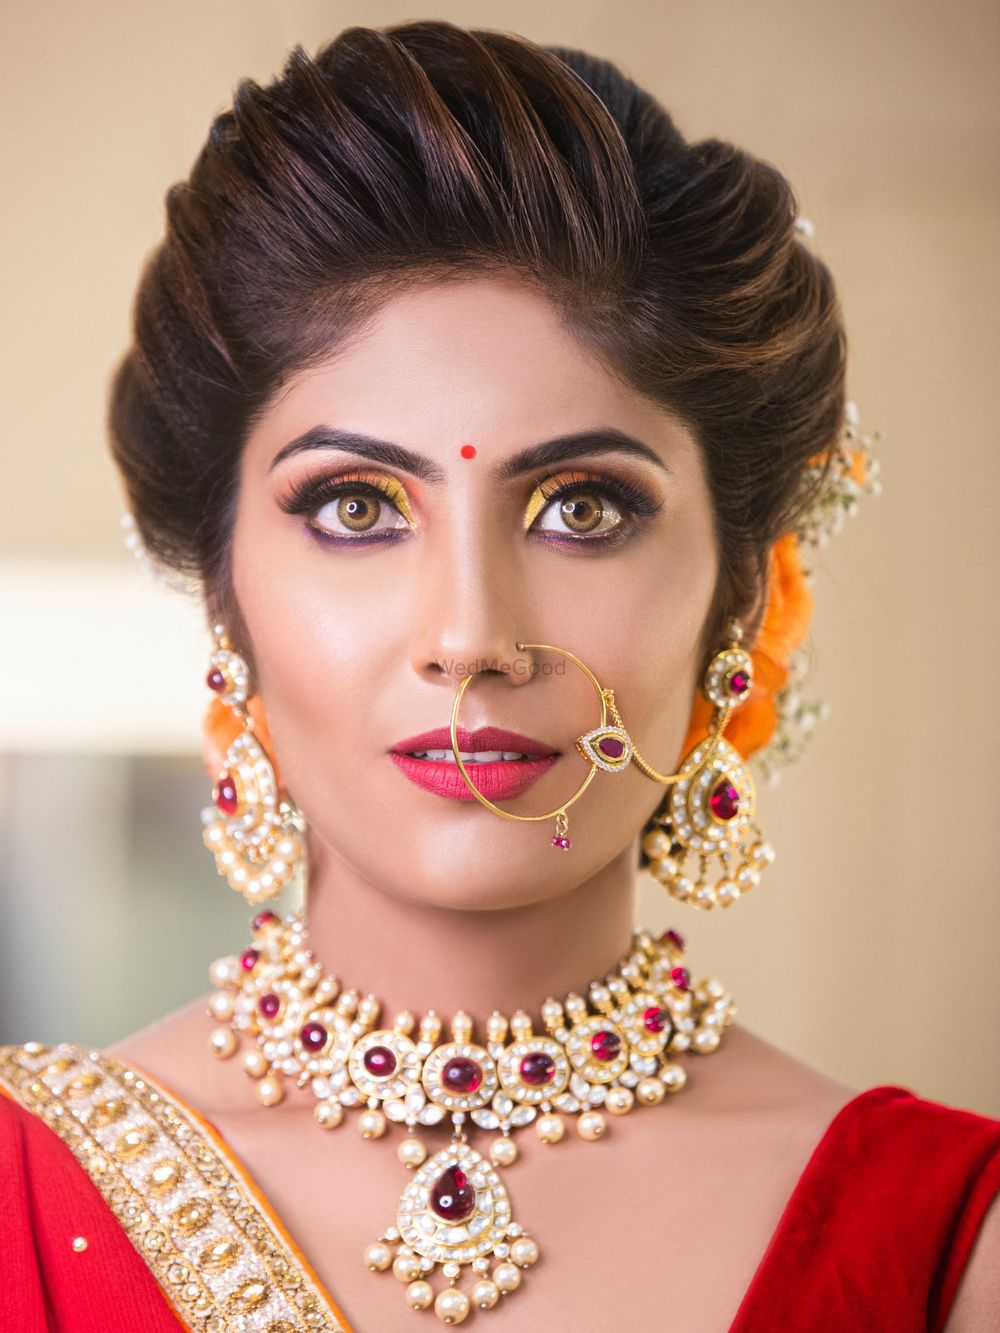 Photo From Collaborations - By Shweta Kekal Makeup and Hair